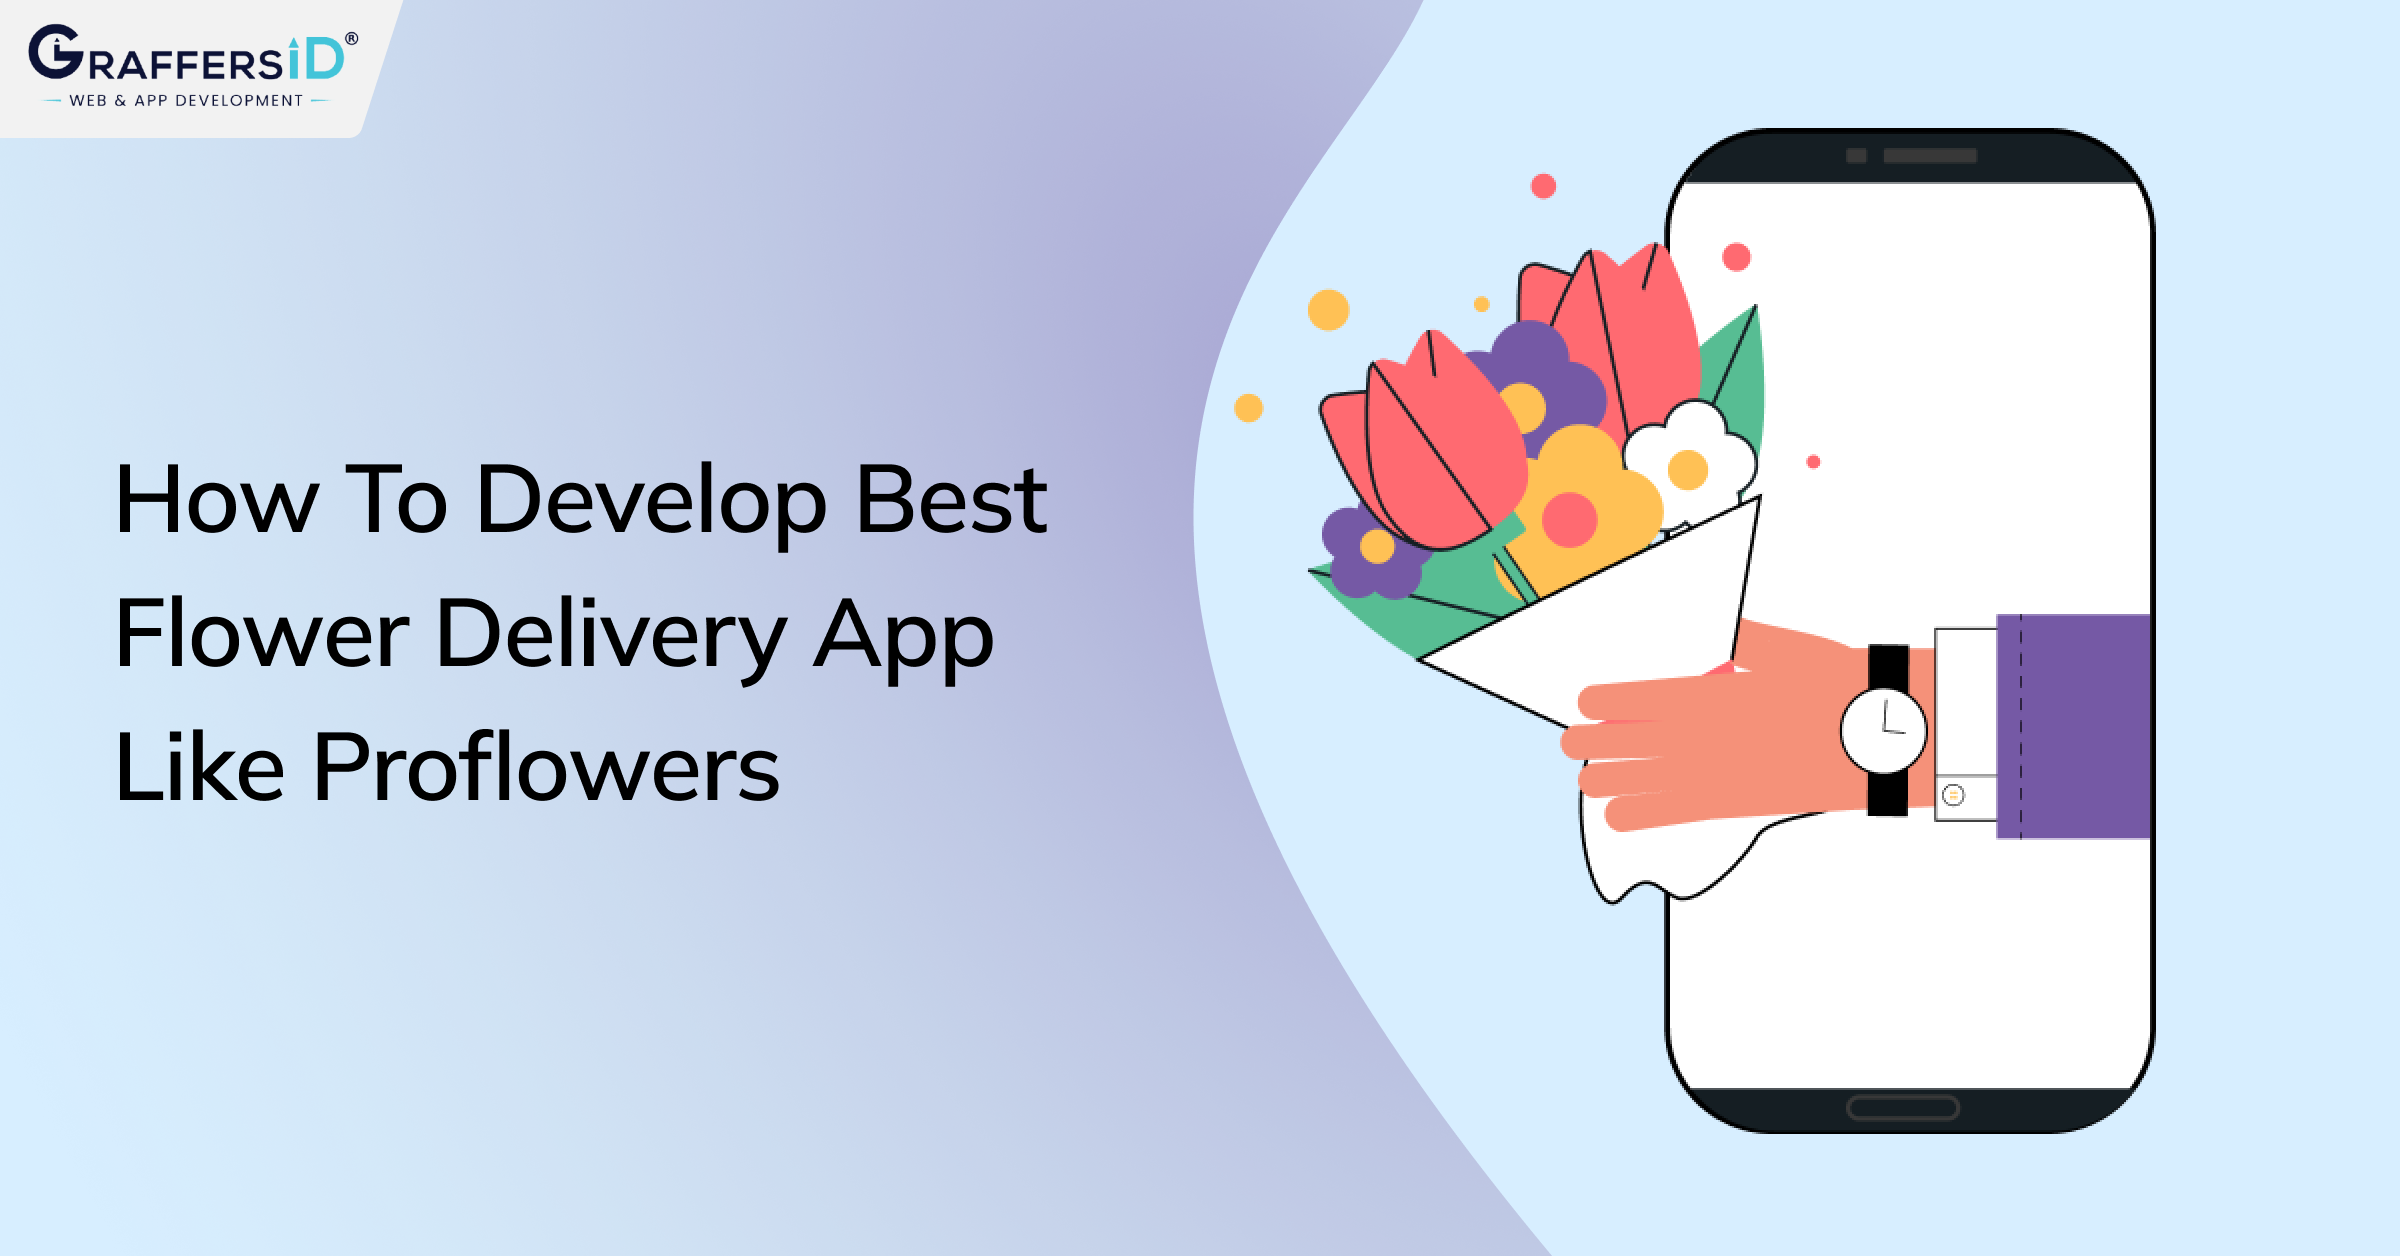 How To Develop The Best Flower Delivery App Like Proflowers